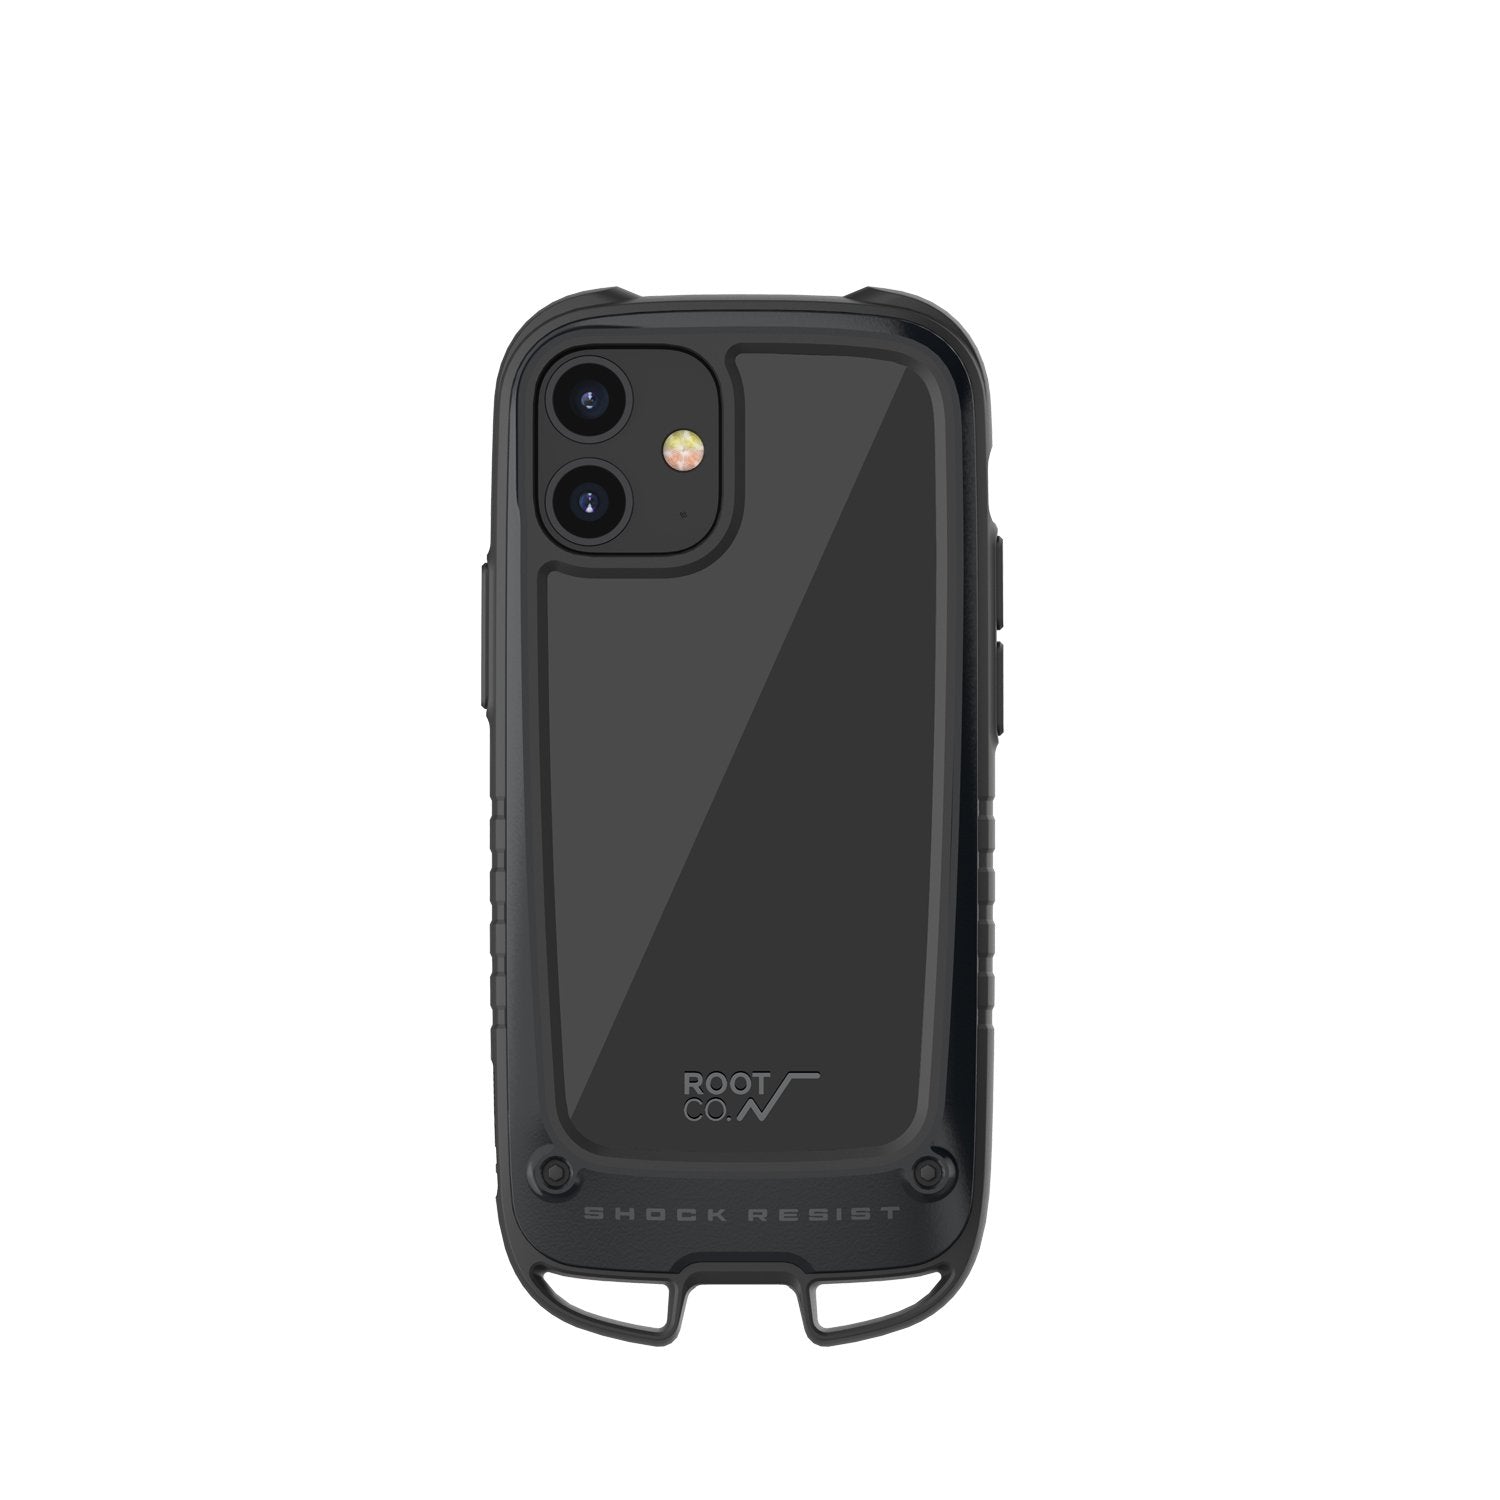 ROOT CO. Gravity Shock Resist Case + Hold for iPhone 12 mini 5.4"(2020), Black Default ROOT CO. 